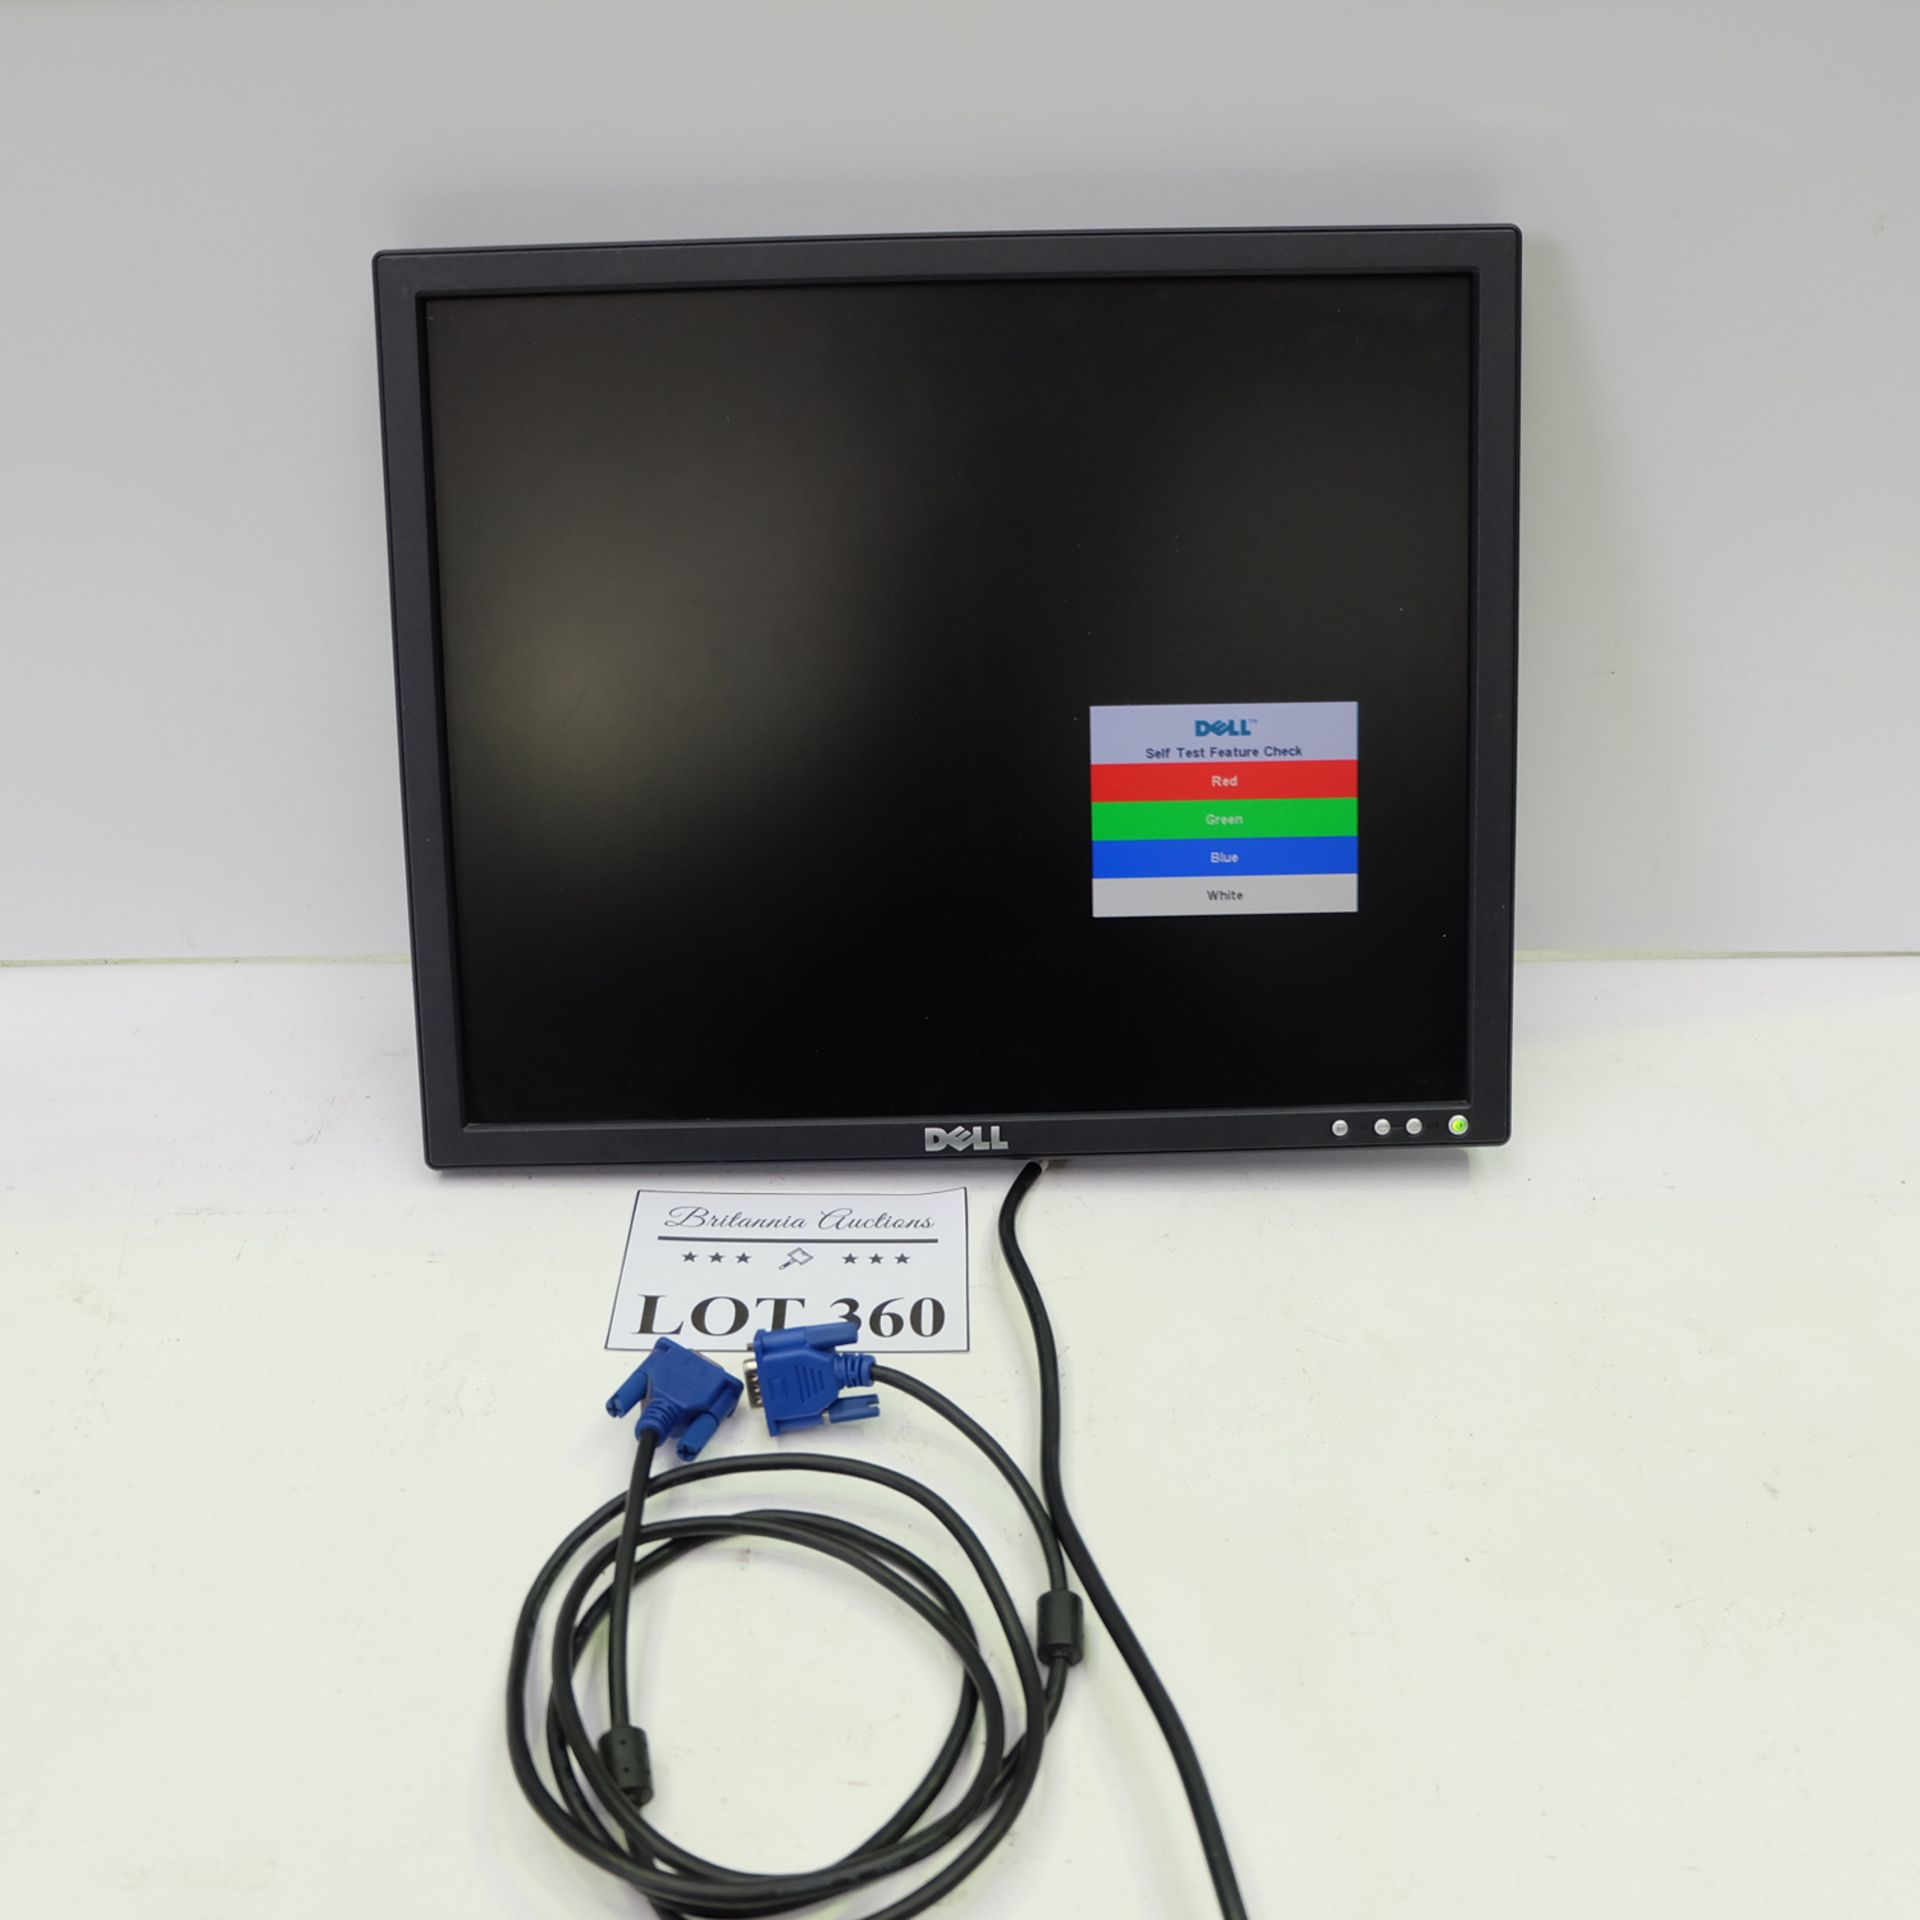 DELL Monitor with VGA & Power Lead.